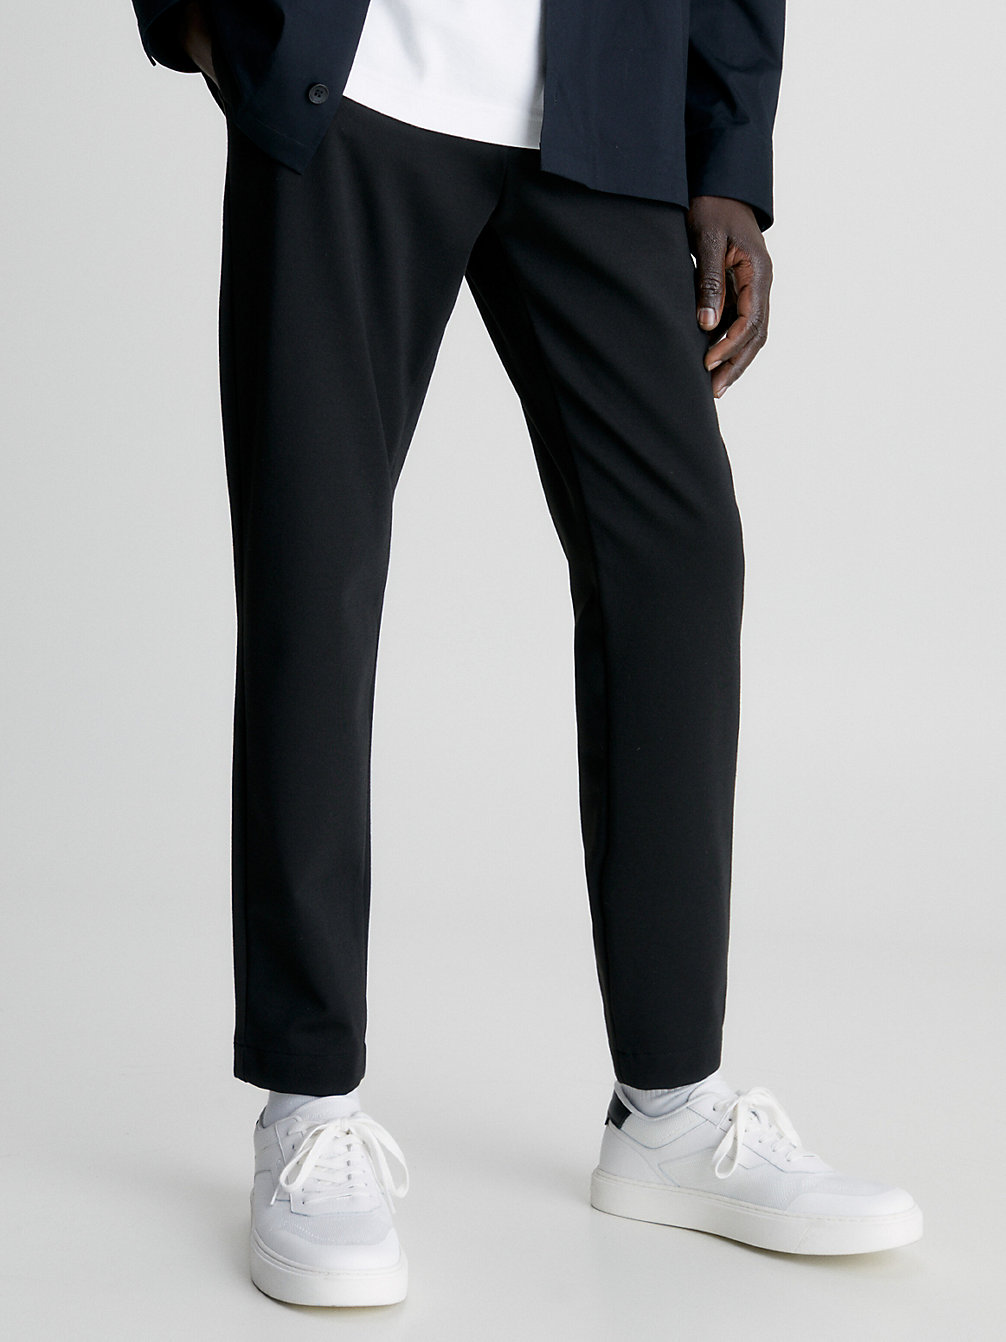 CK BLACK Cropped Tapered Trousers undefined men Calvin Klein